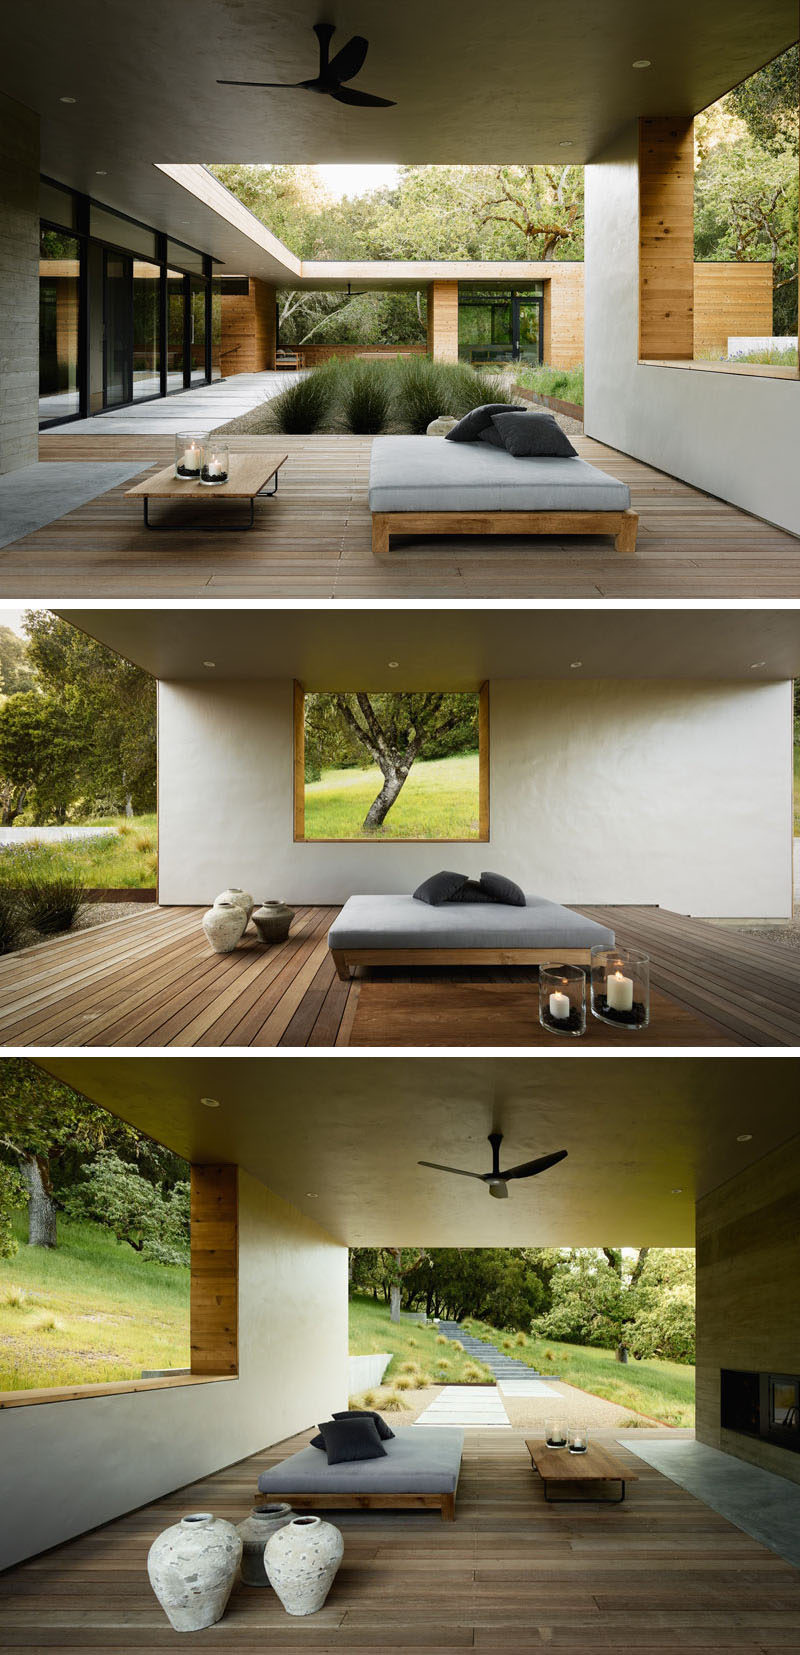 This home has a covered outdoor living room with a day bed and fireplace. A cut-out in the wall perfectly frames a single tree.